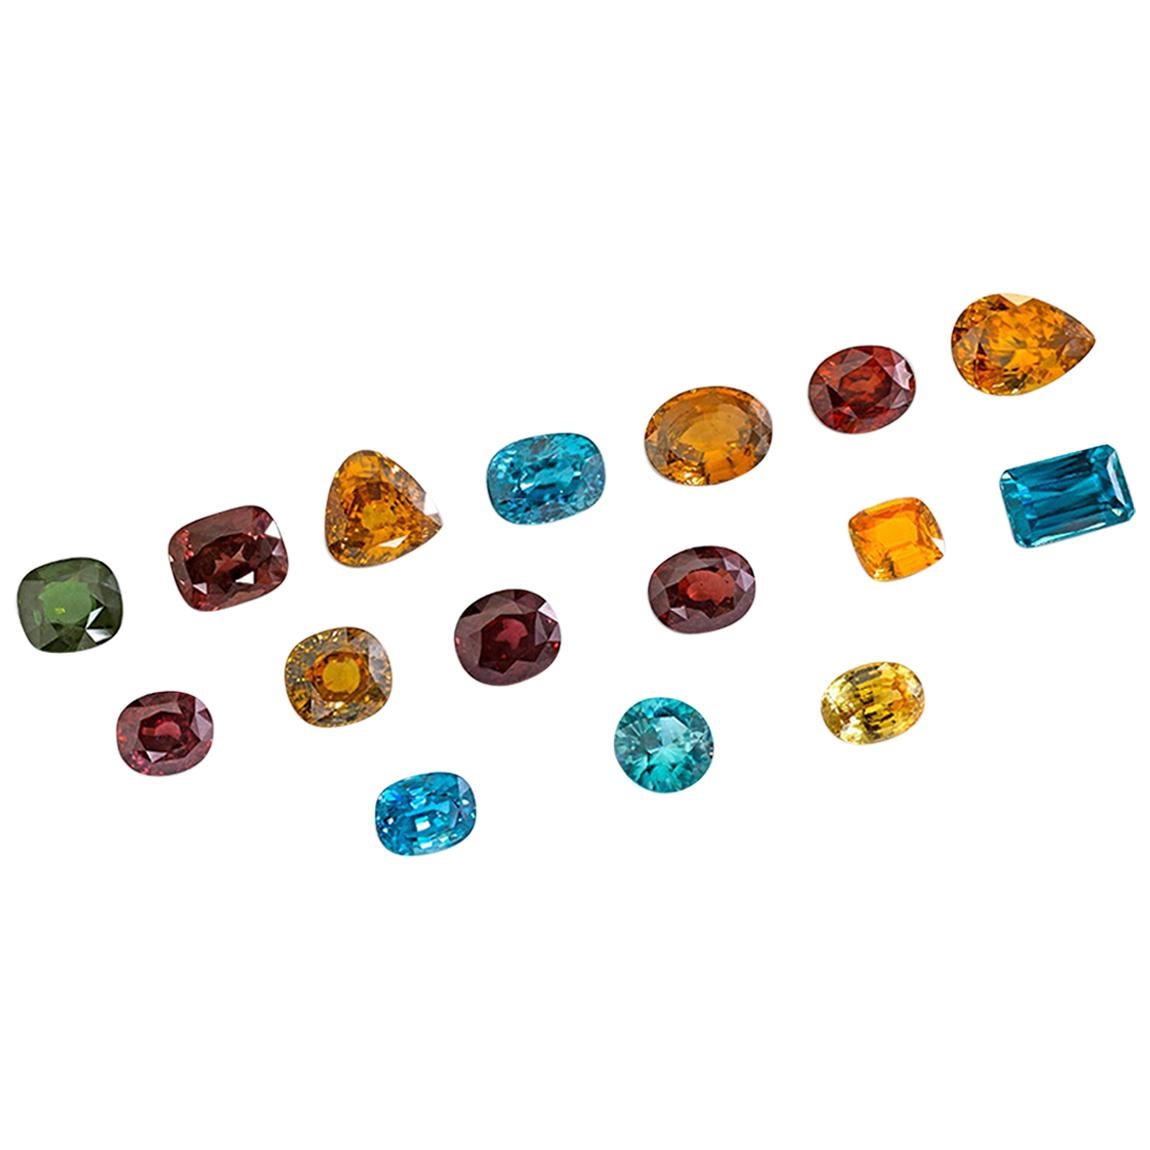 Privately Curated Zircon Collection, Unset Loose Gemstones,  347.05 Carats Total For Sale